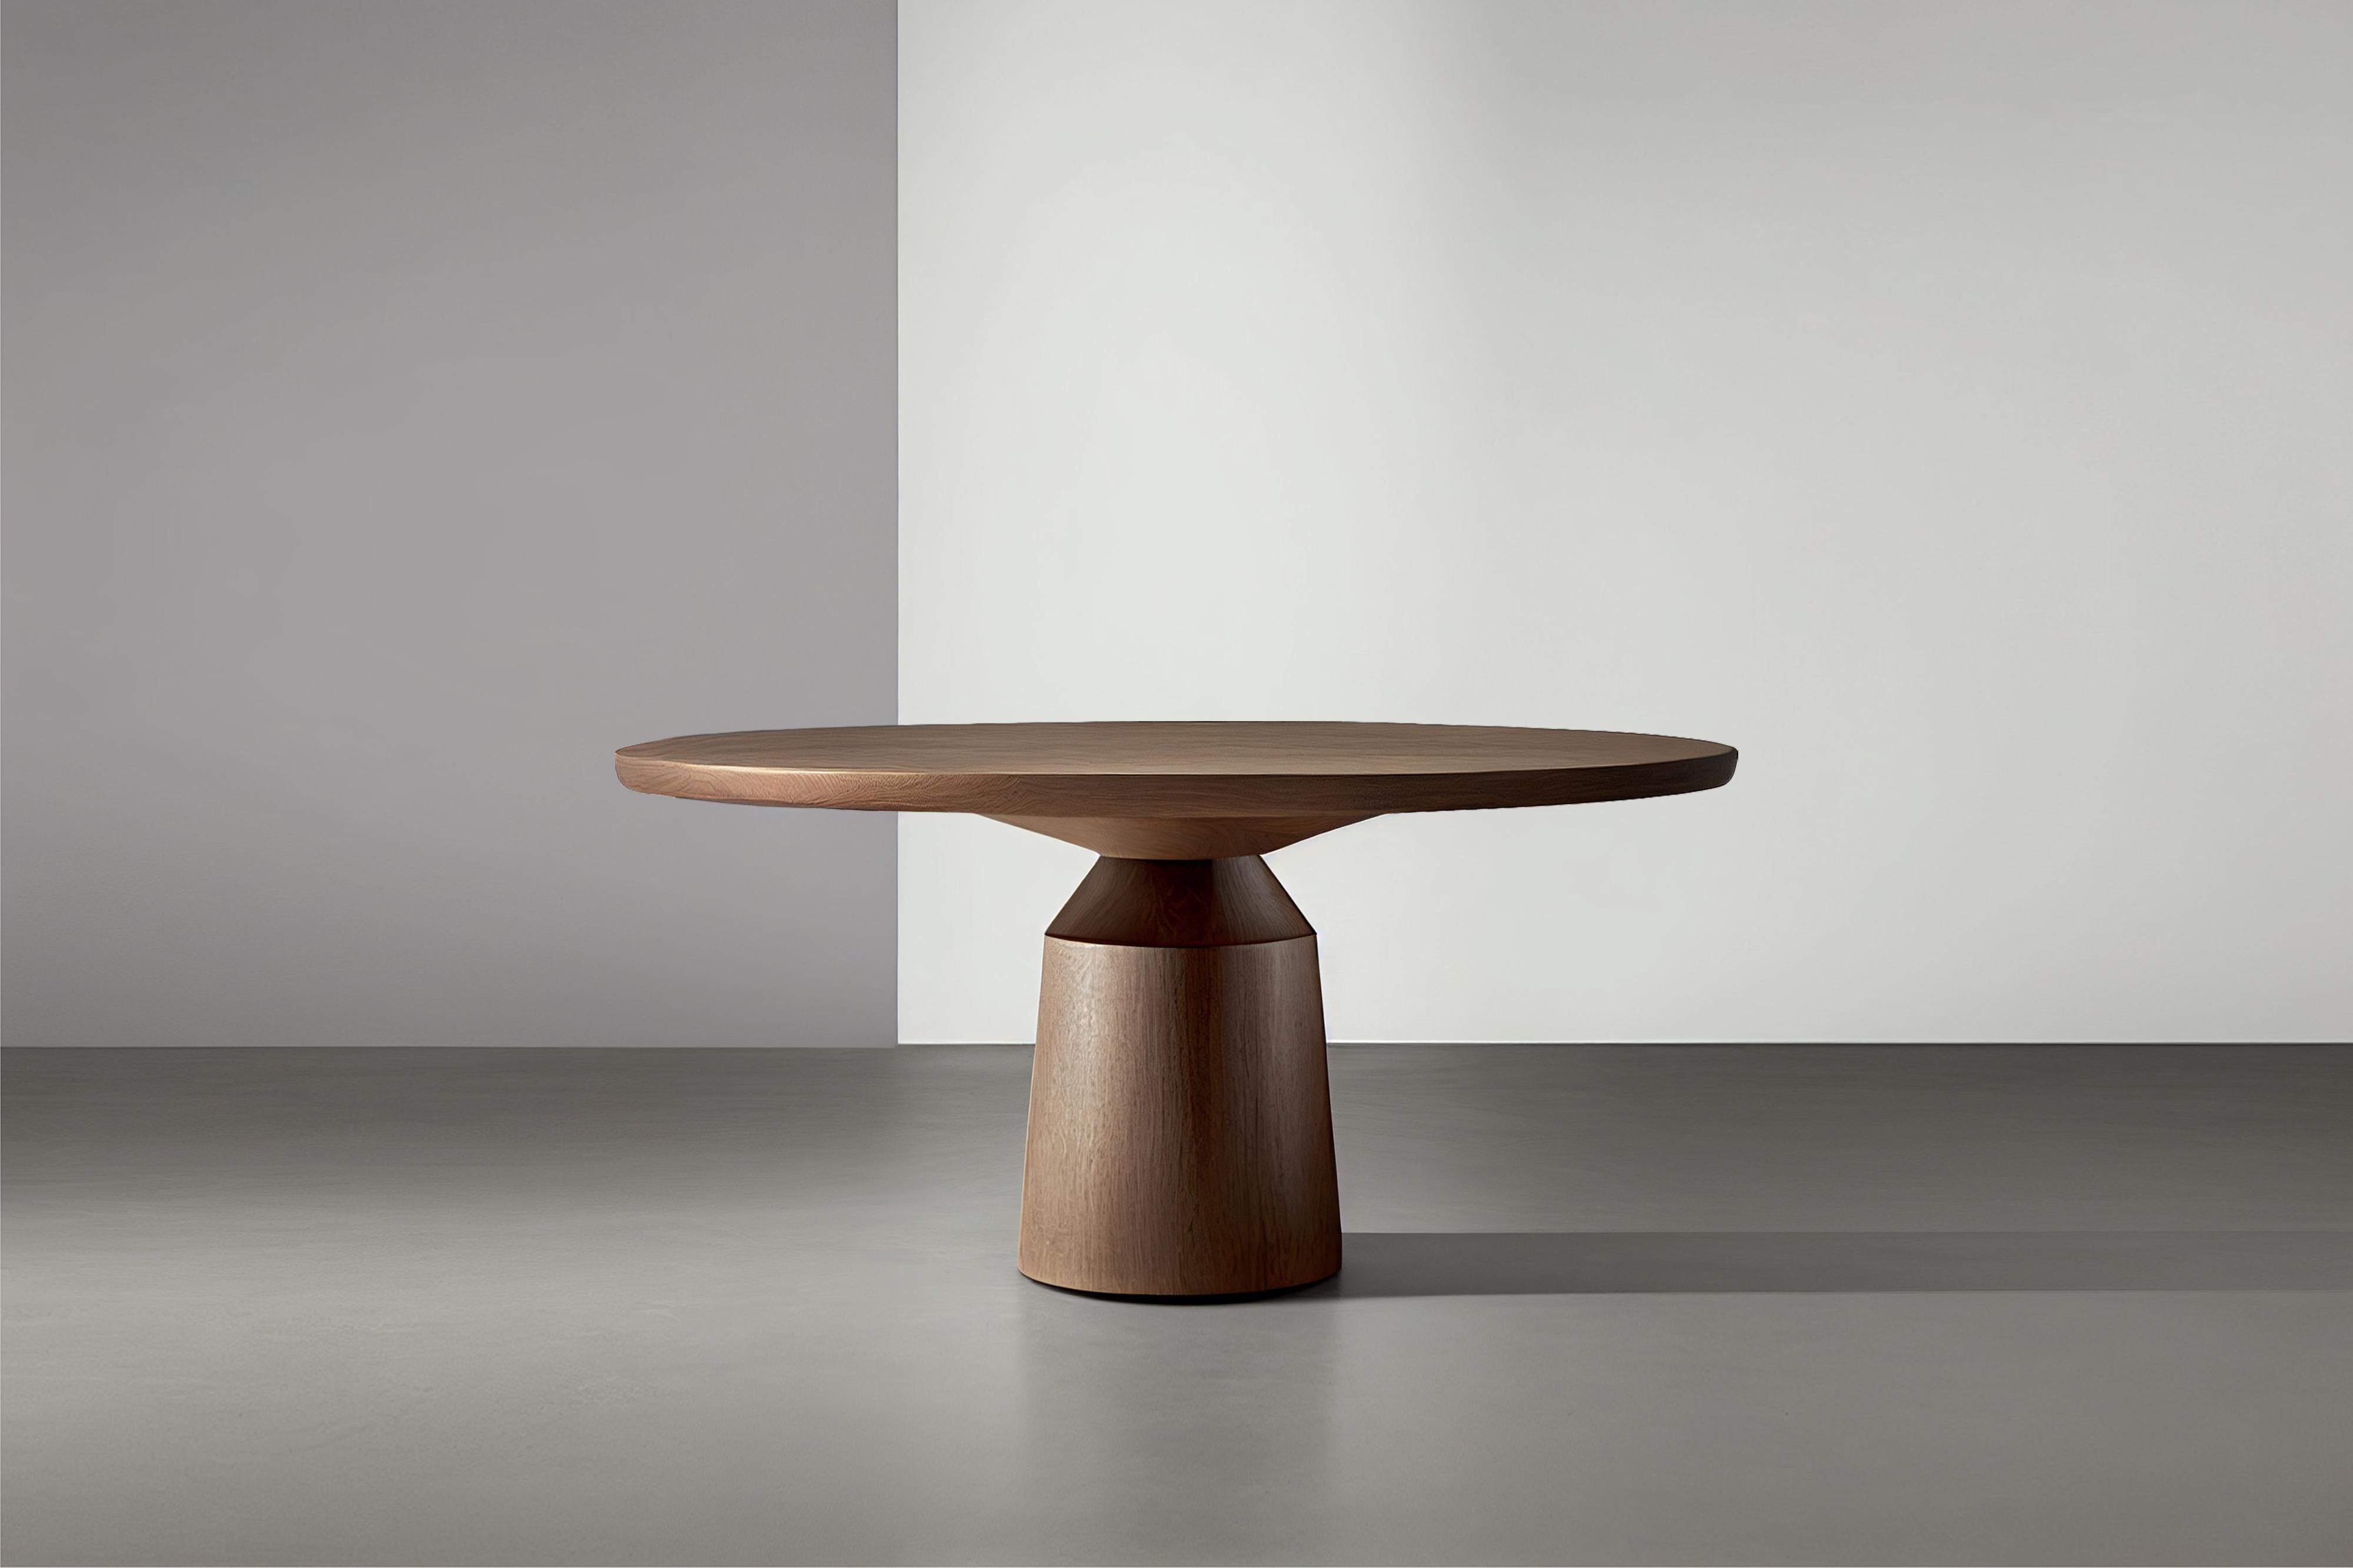 Moka dining table, round table for four by NONO 

The Moka dining table is a sculptural dining table collection inspired by the iconic Italian moka pot. Crafted from solid wood, its contemporary shapes is a design of the NONO Design Team. With a